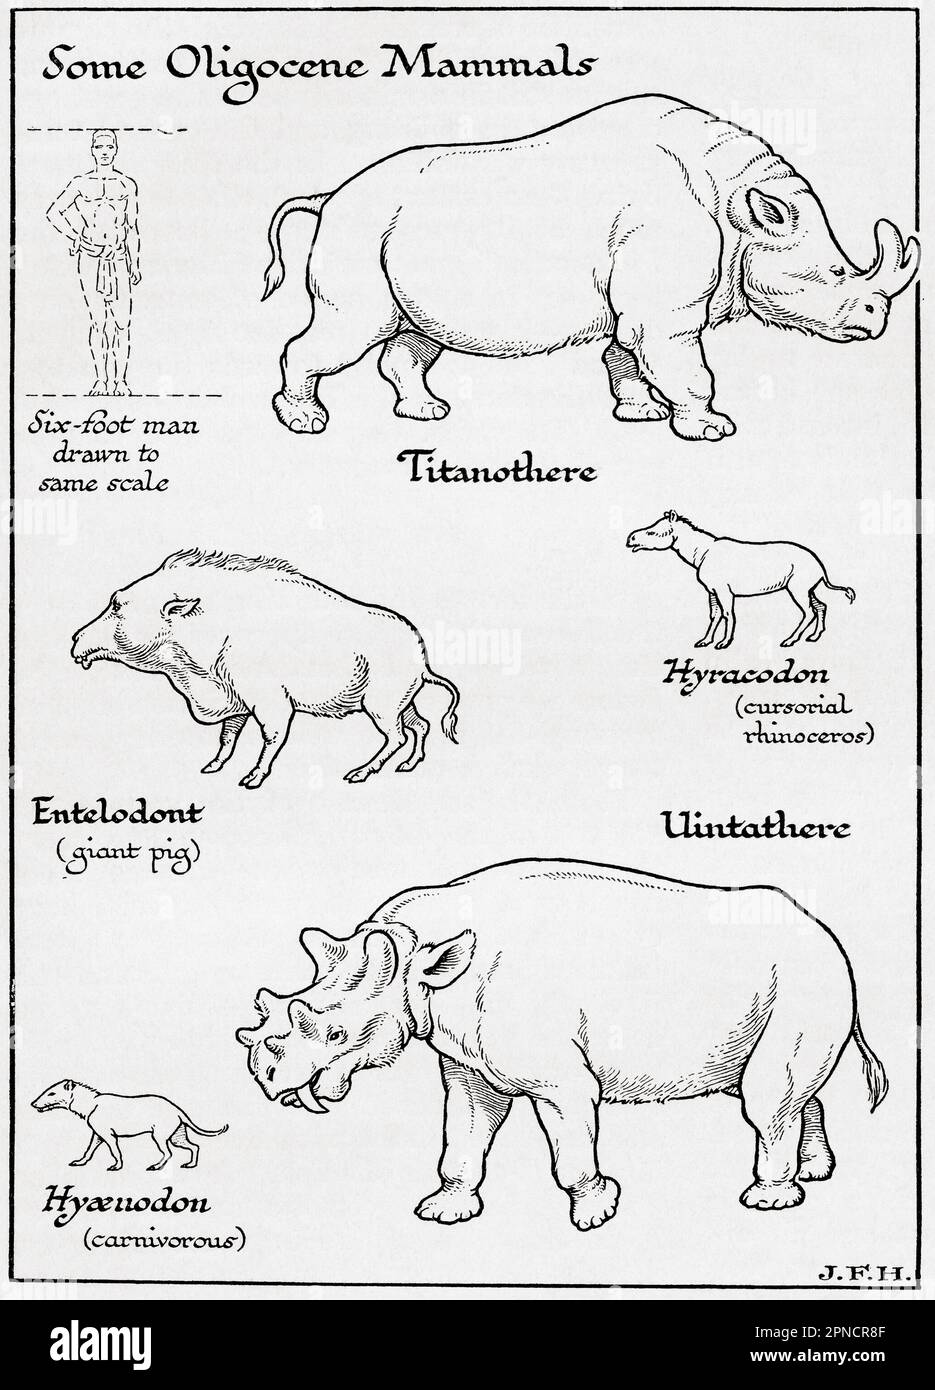 Diagram of Oligocene Mammals including, Titanothere, Entelodont, Hyracodon, Uintathere, Hyaenodon.  Shown in the diagram a six foot man drawn to the same scale as other figures.  From the book Outline of History by H.G. Wells, published 1920. Stock Photo